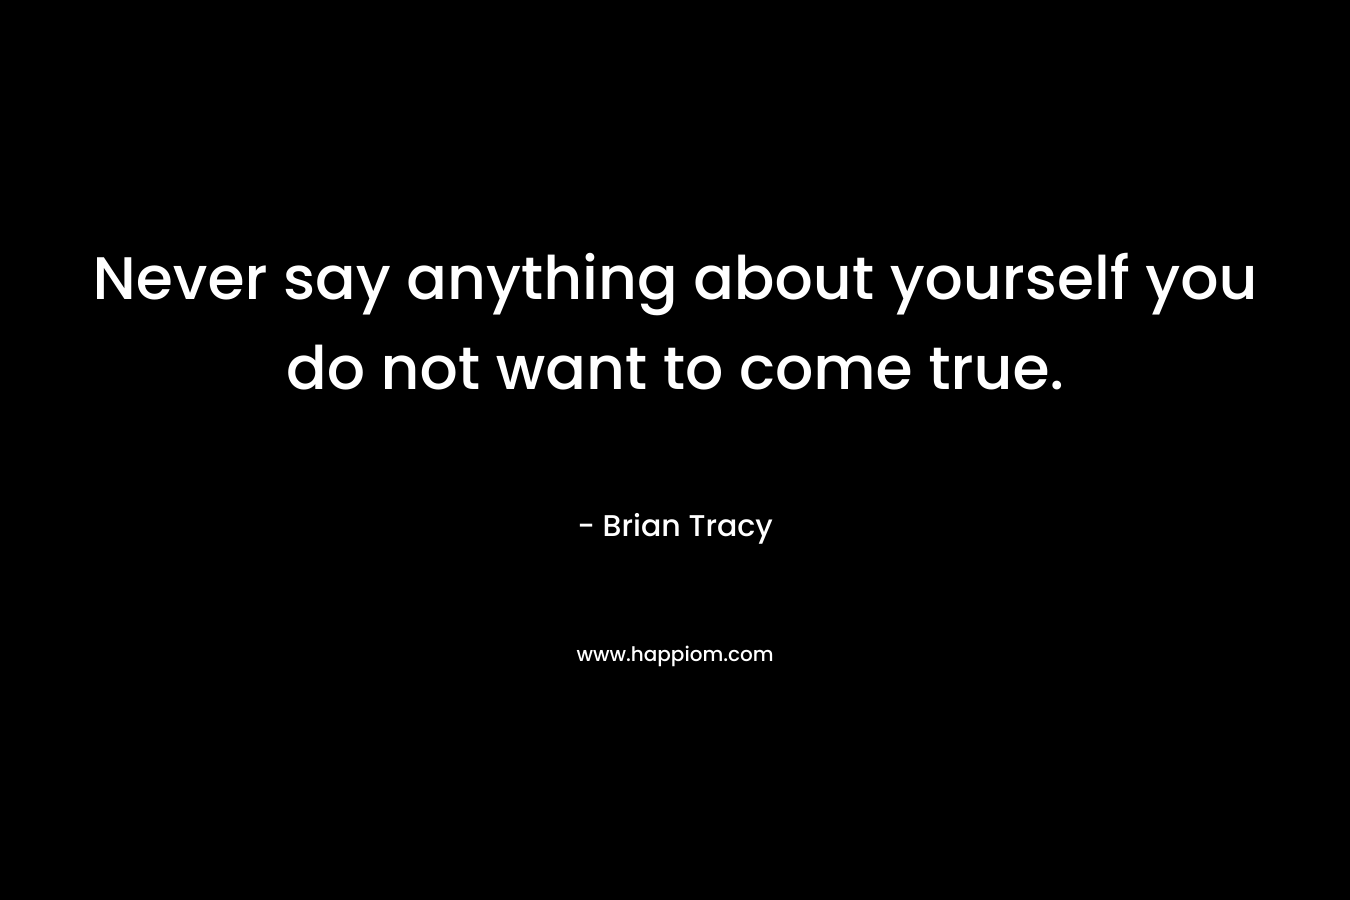 Never say anything about yourself you do not want to come true.